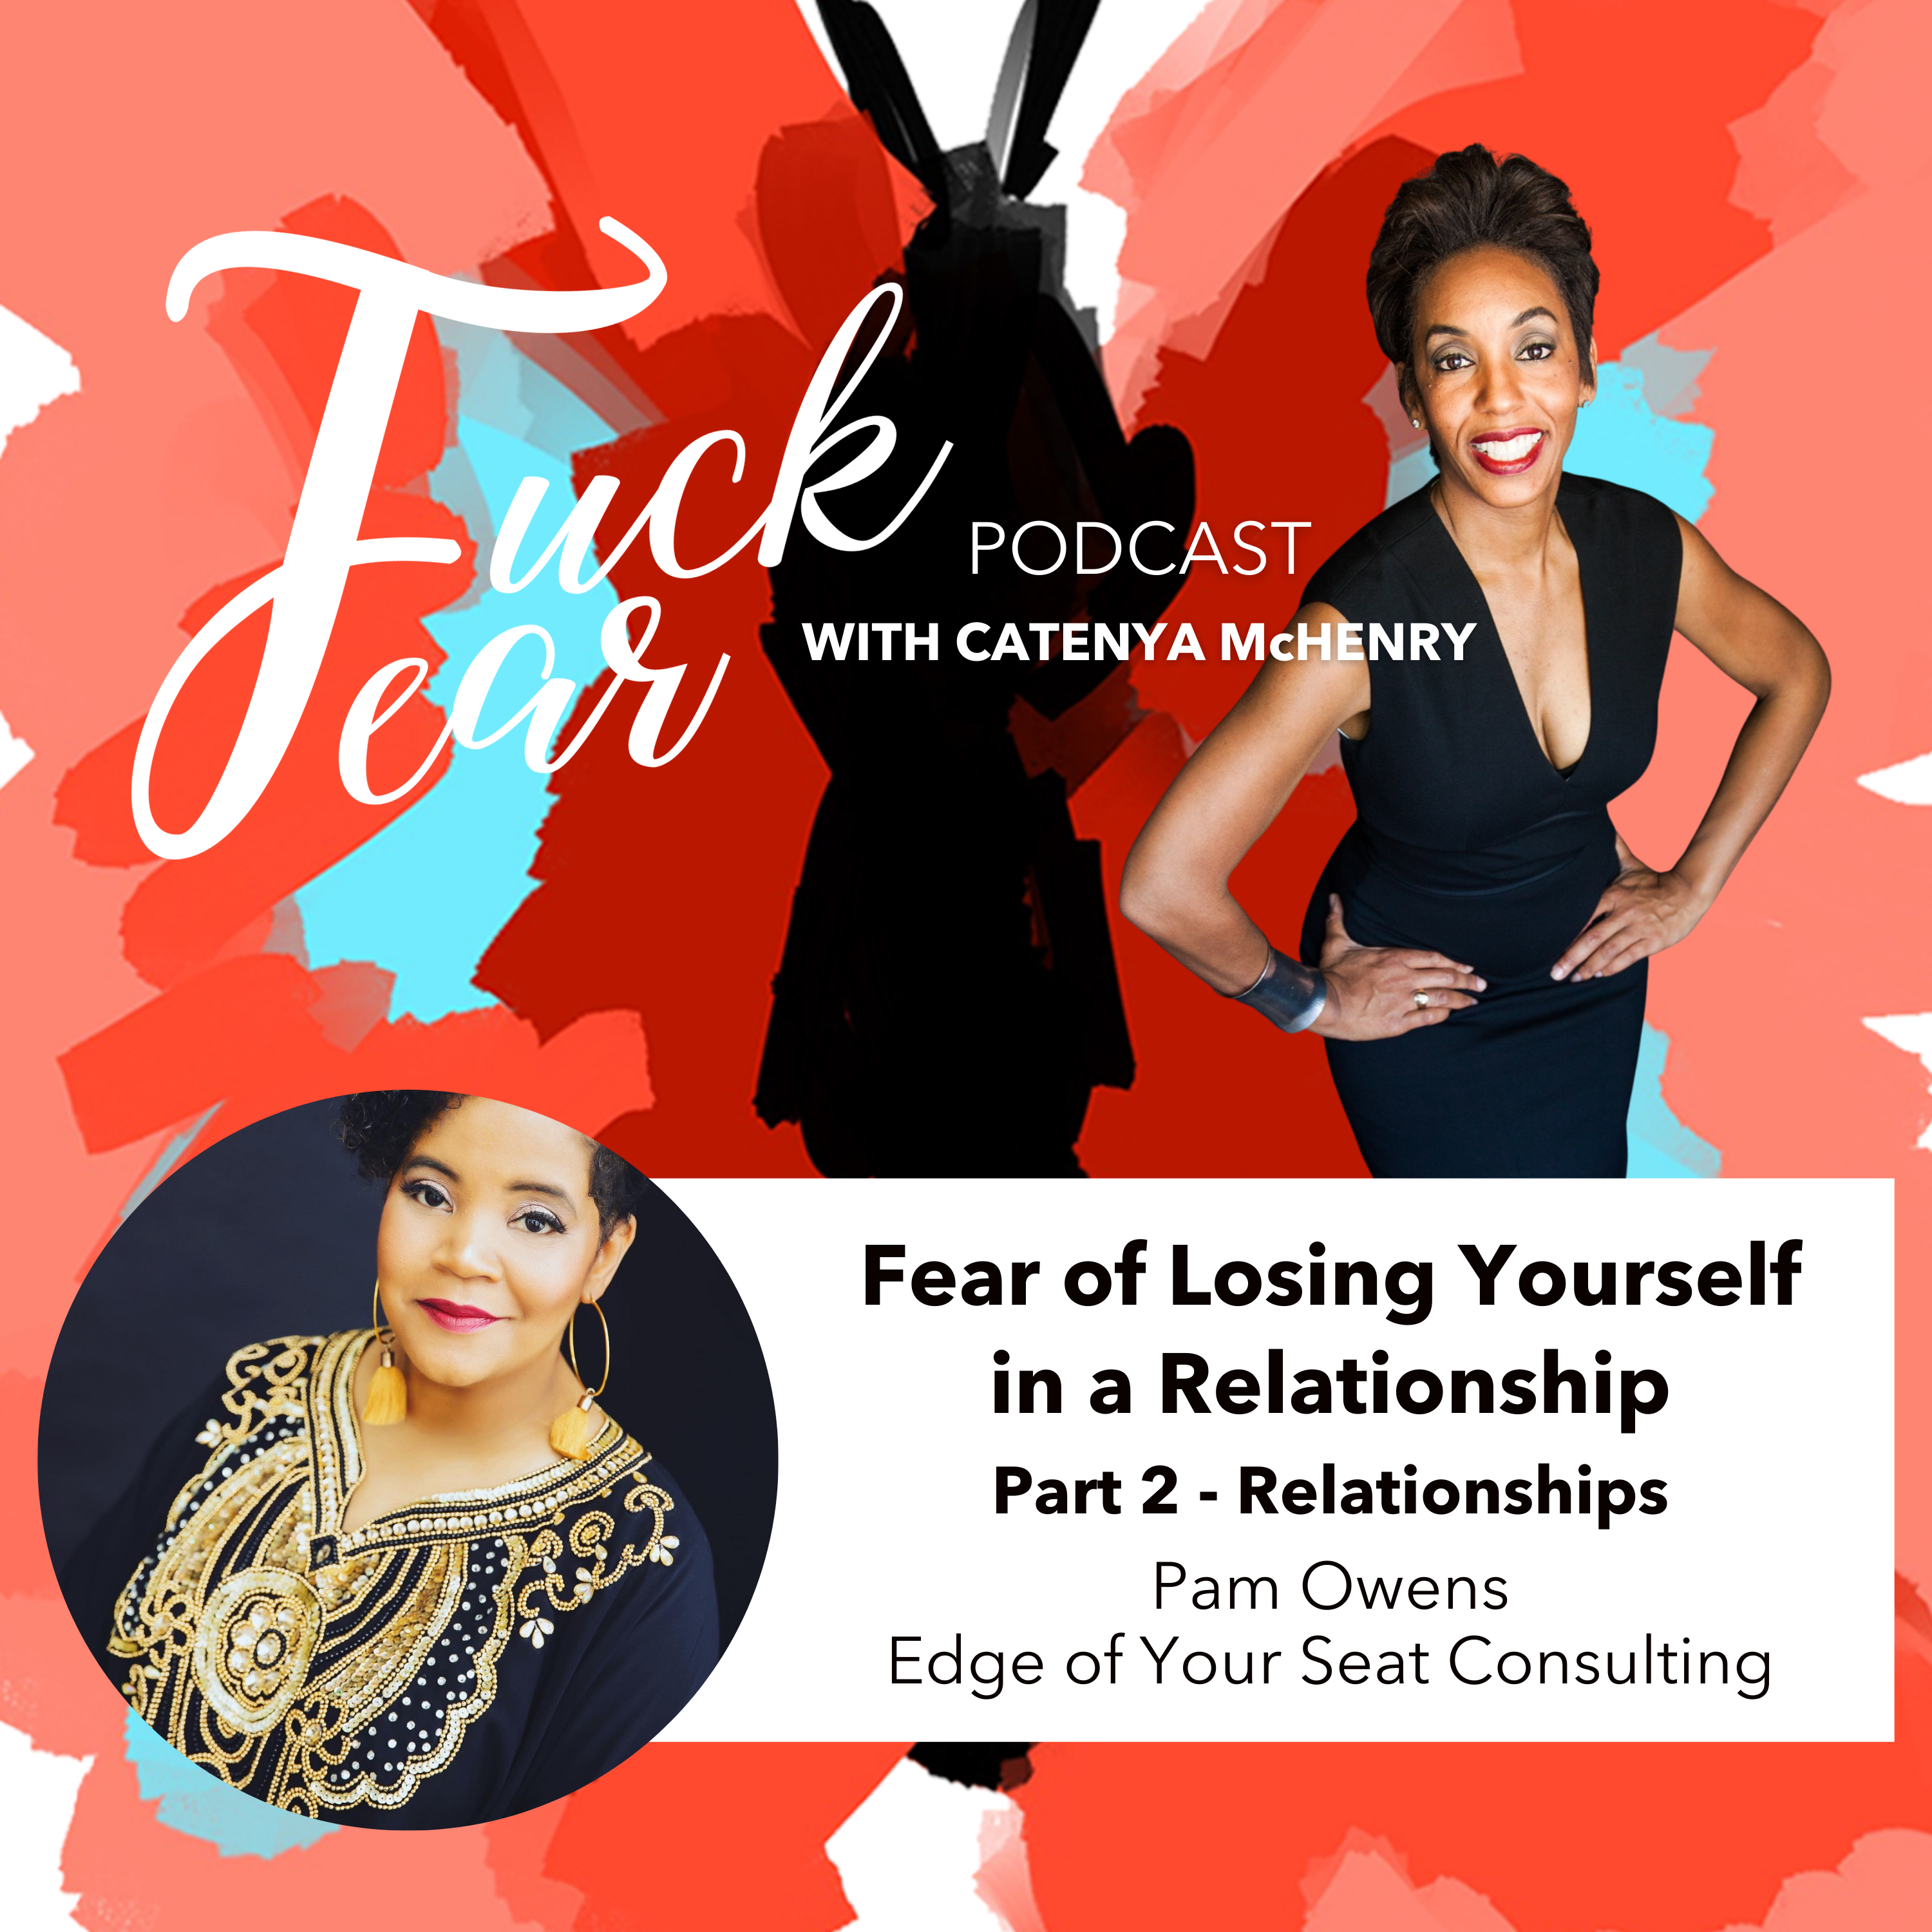 Fear of Losing Yourself in a relationship Fuck Fear Podcast episode with Catenya McHenry and guest Pam Benson Owens with Edge of Your Seat Consulting